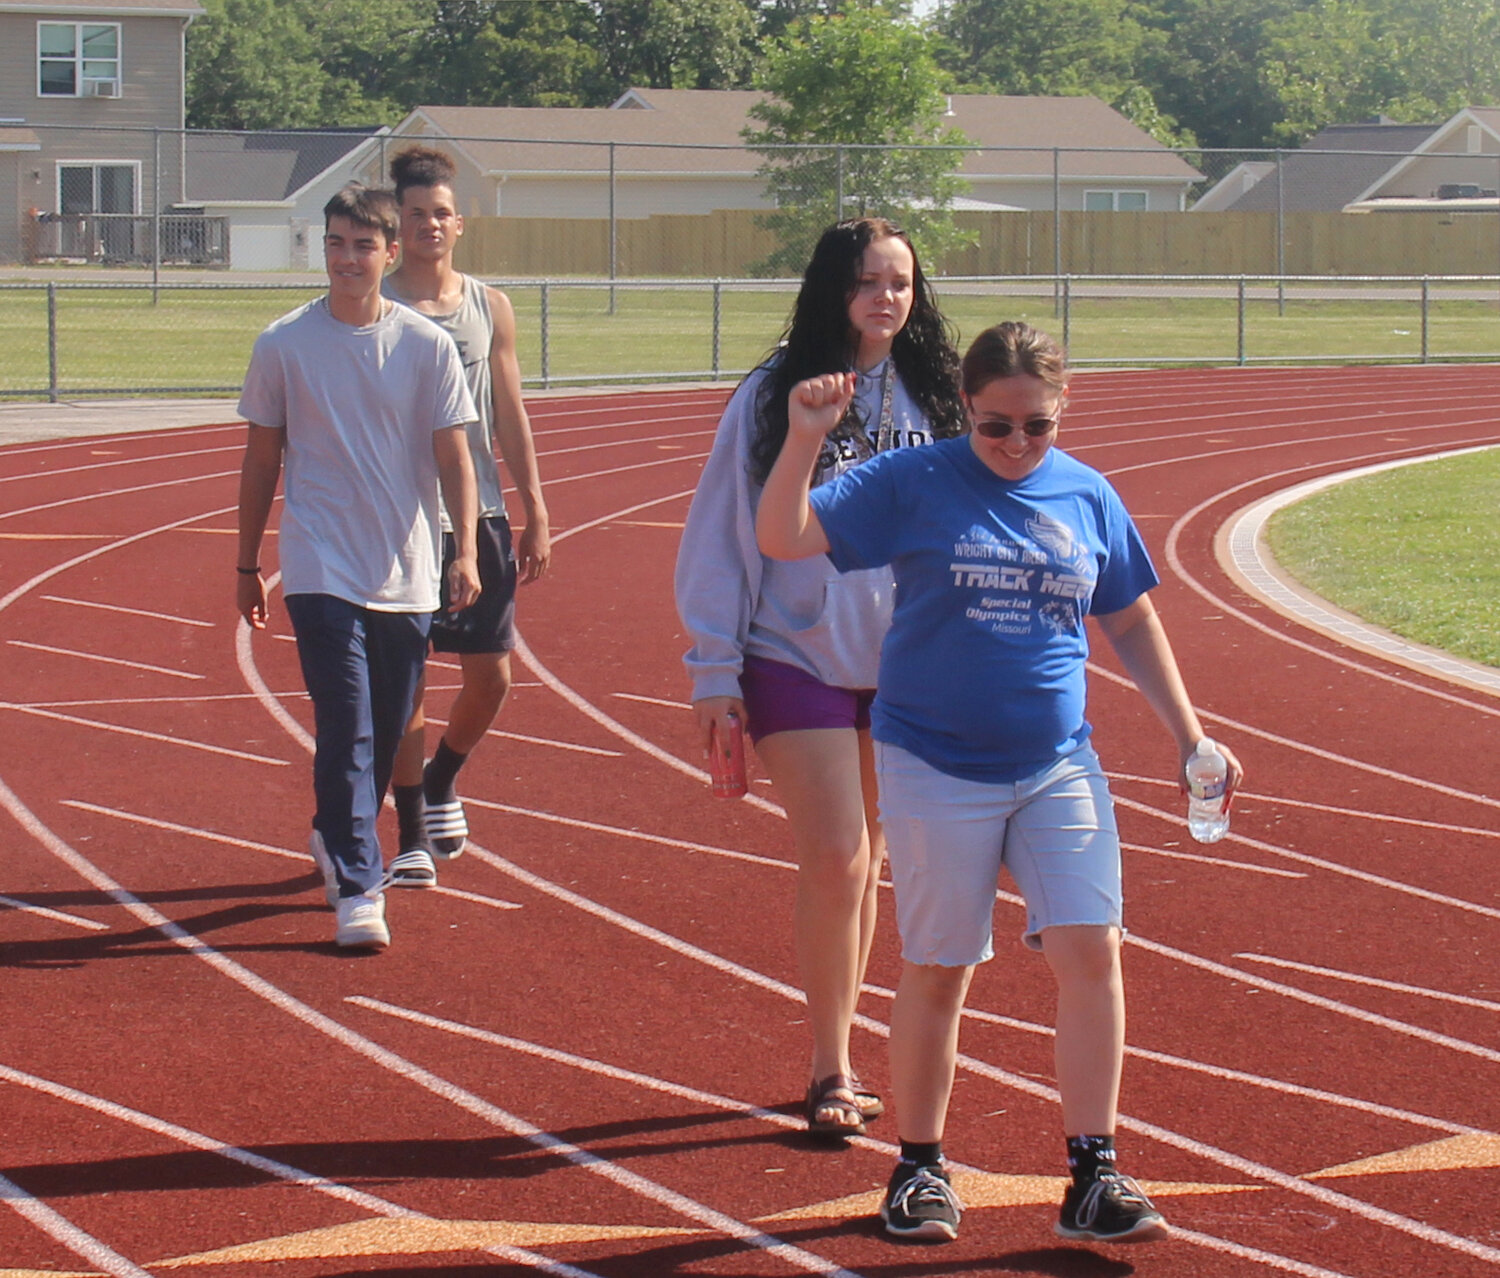 A student pumps her first as the last few students complete the practice processional during Wright City High School graduation rehearsal.